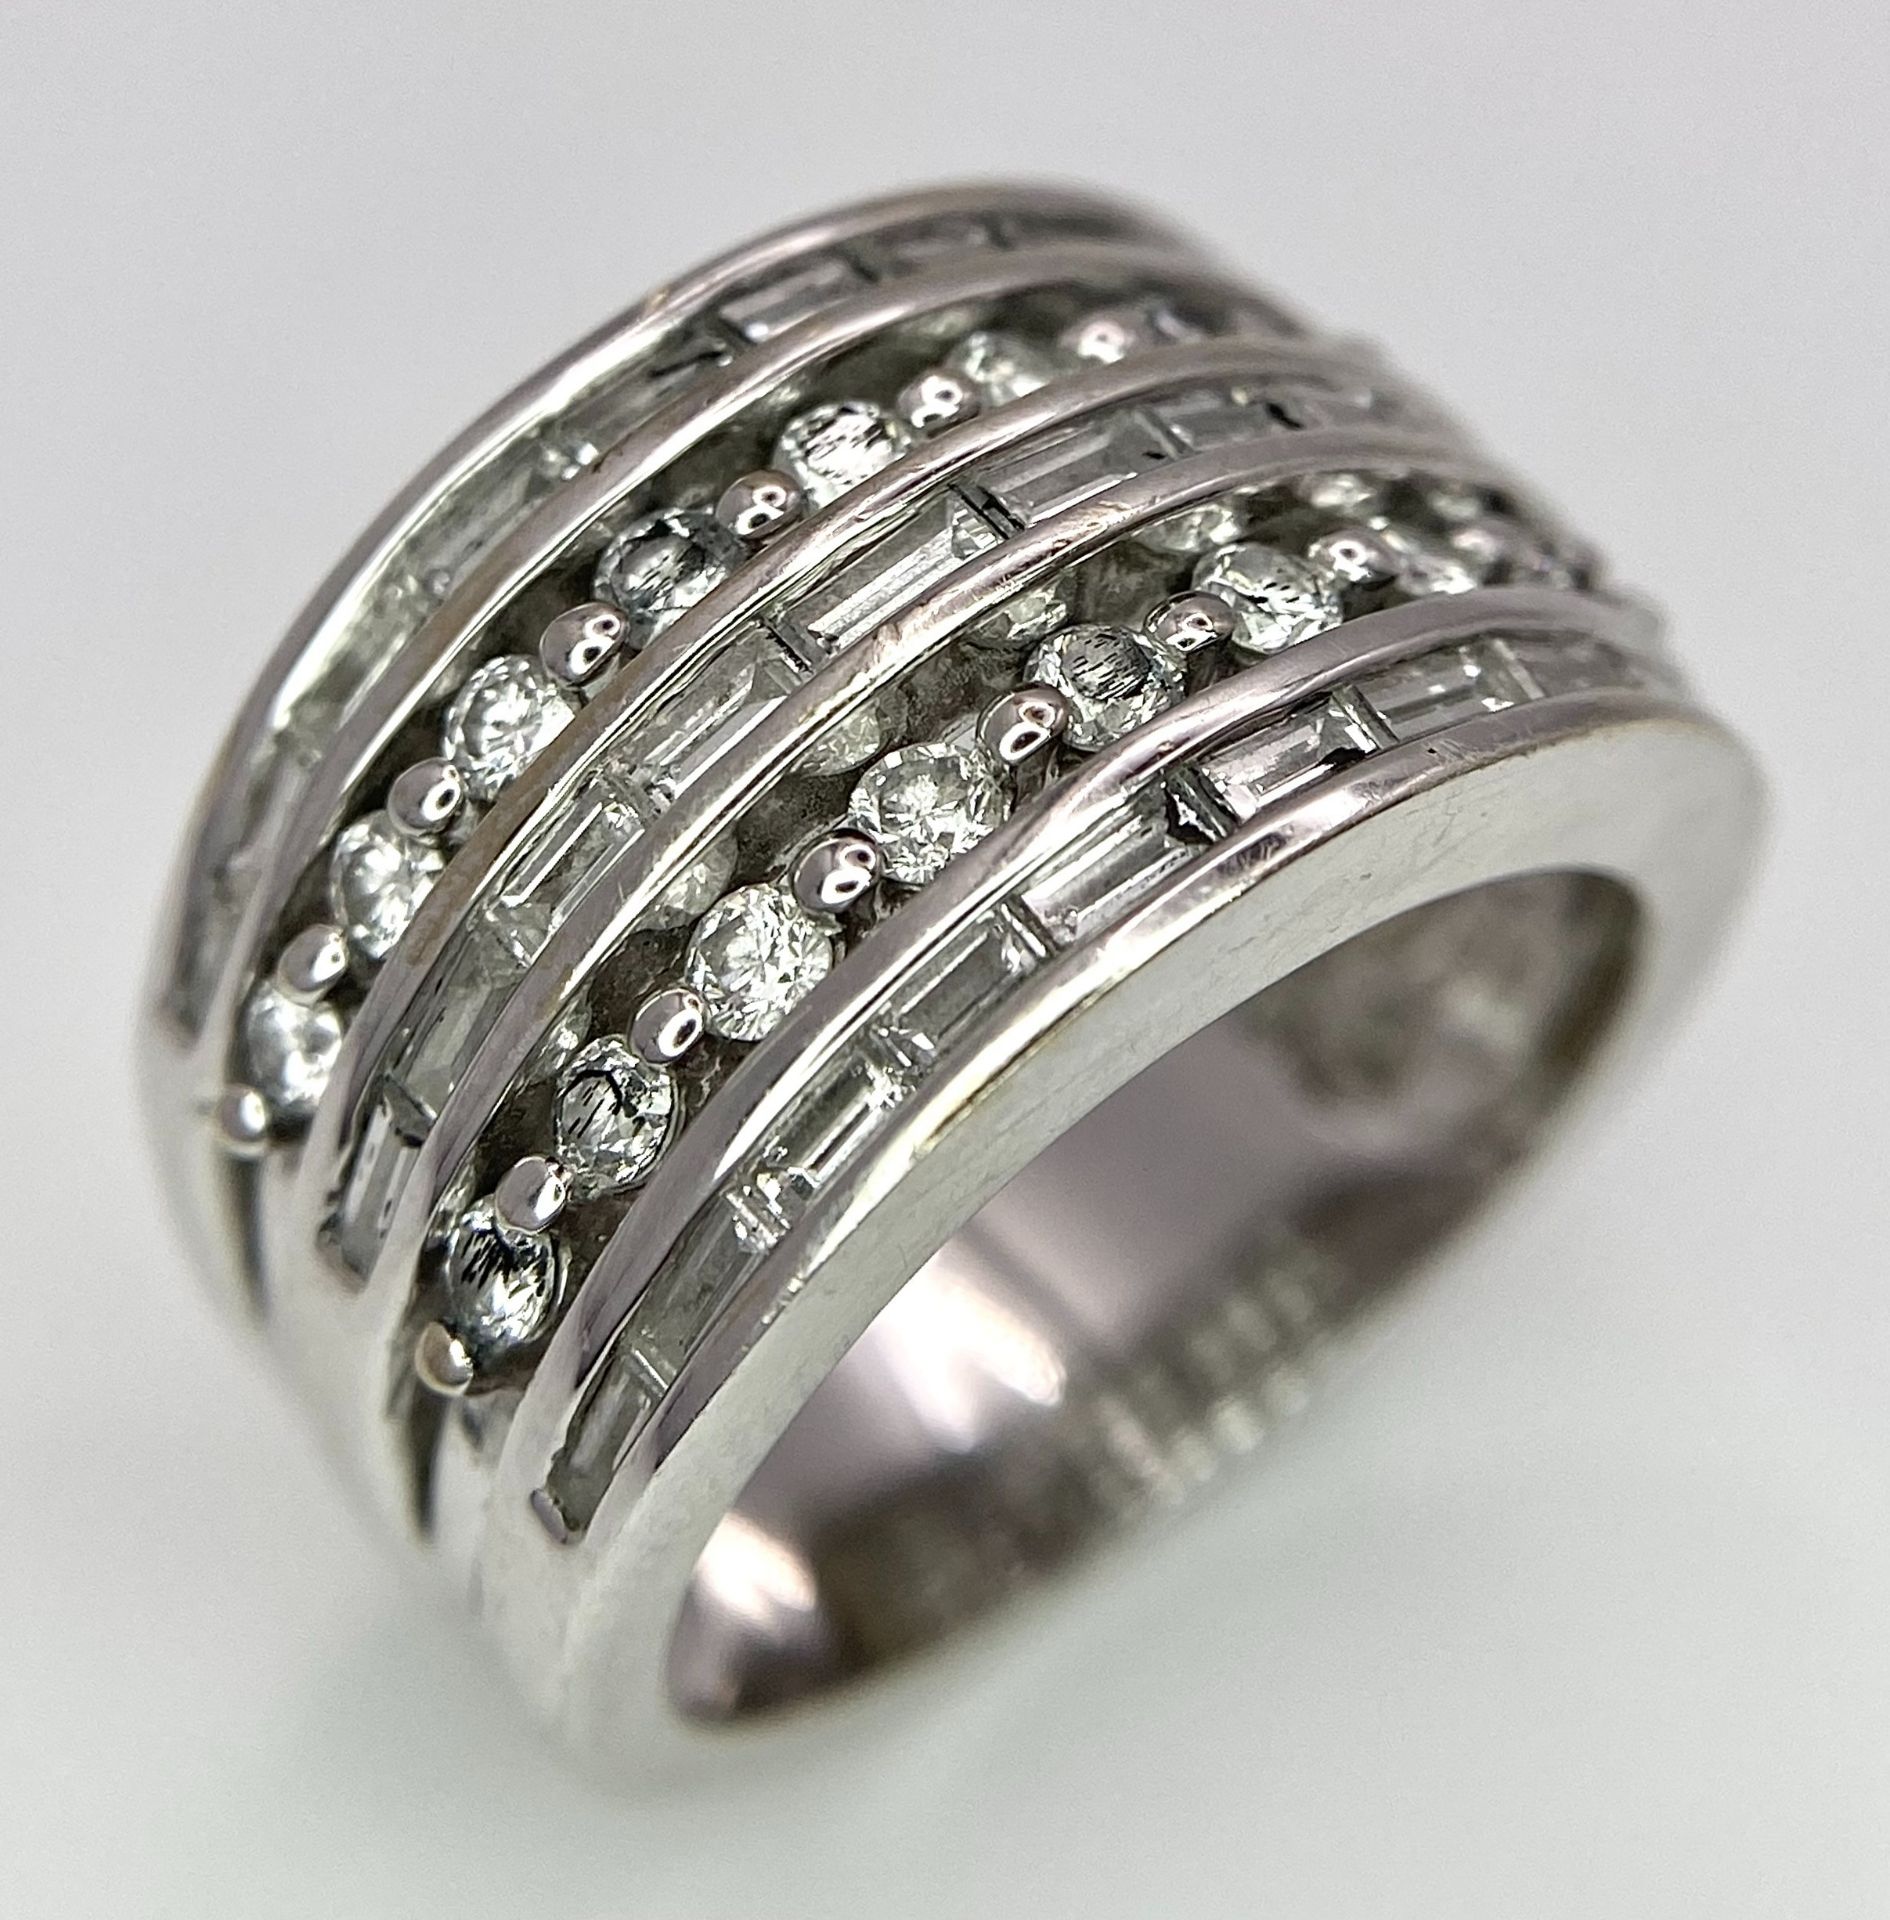 AN 18K WHITE GOLD 5 ROW DIAMOND RING. MIXTURE OF ROUND BRILLIANT CUTS AND BAGUETTE CUT DIAMONDS. - Image 2 of 9